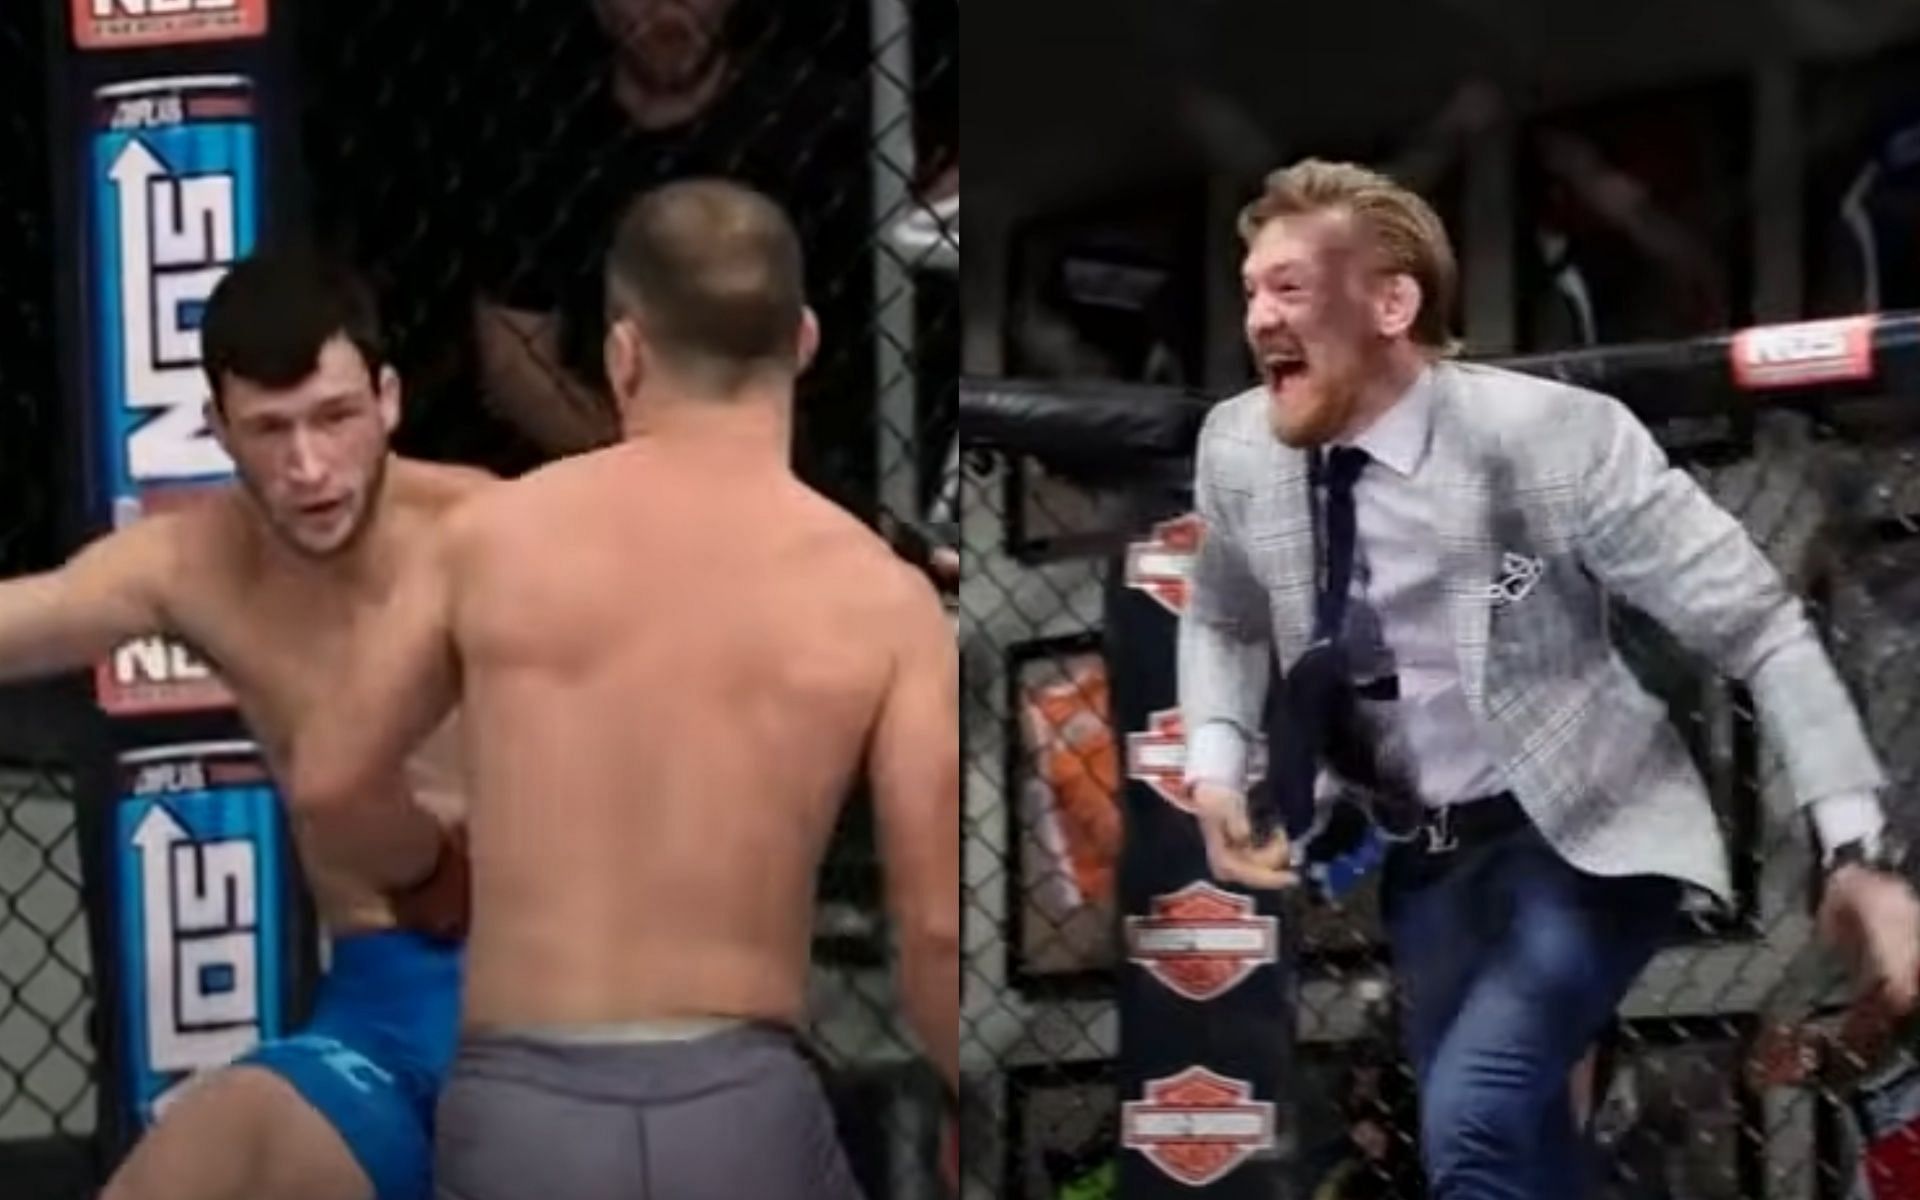 Conor McGregor had a front-row seat for Julian Erosa vs. Artem Lobov. [Images via @TheUltimateFighter on YouTube]